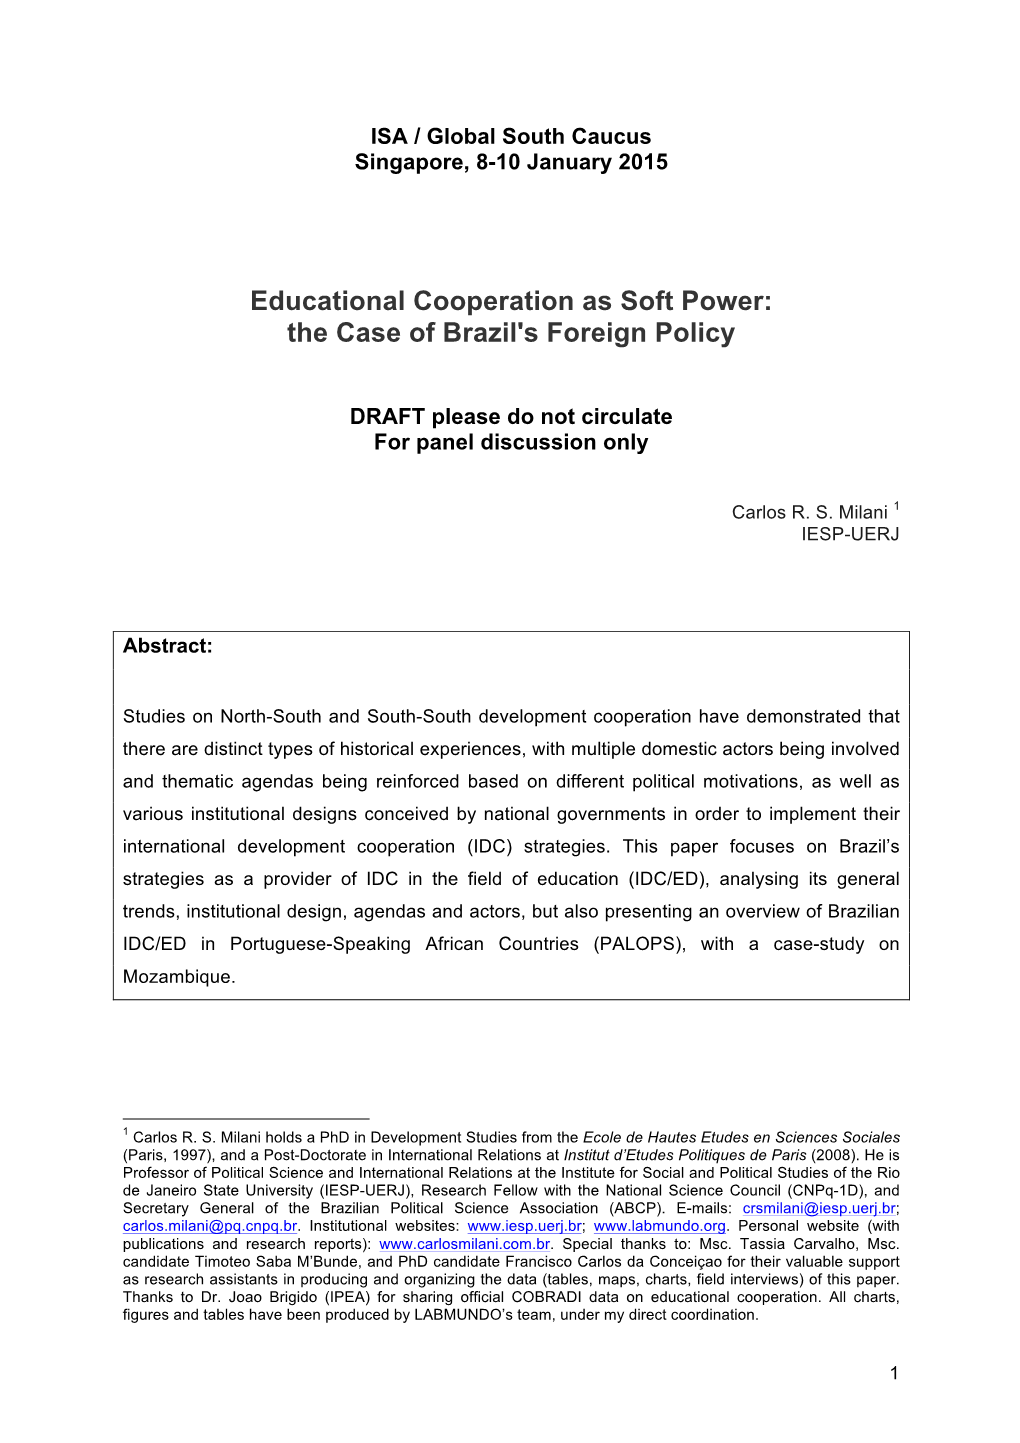 Educational Cooperation As Soft Power: the Case of Brazil's Foreign Policy